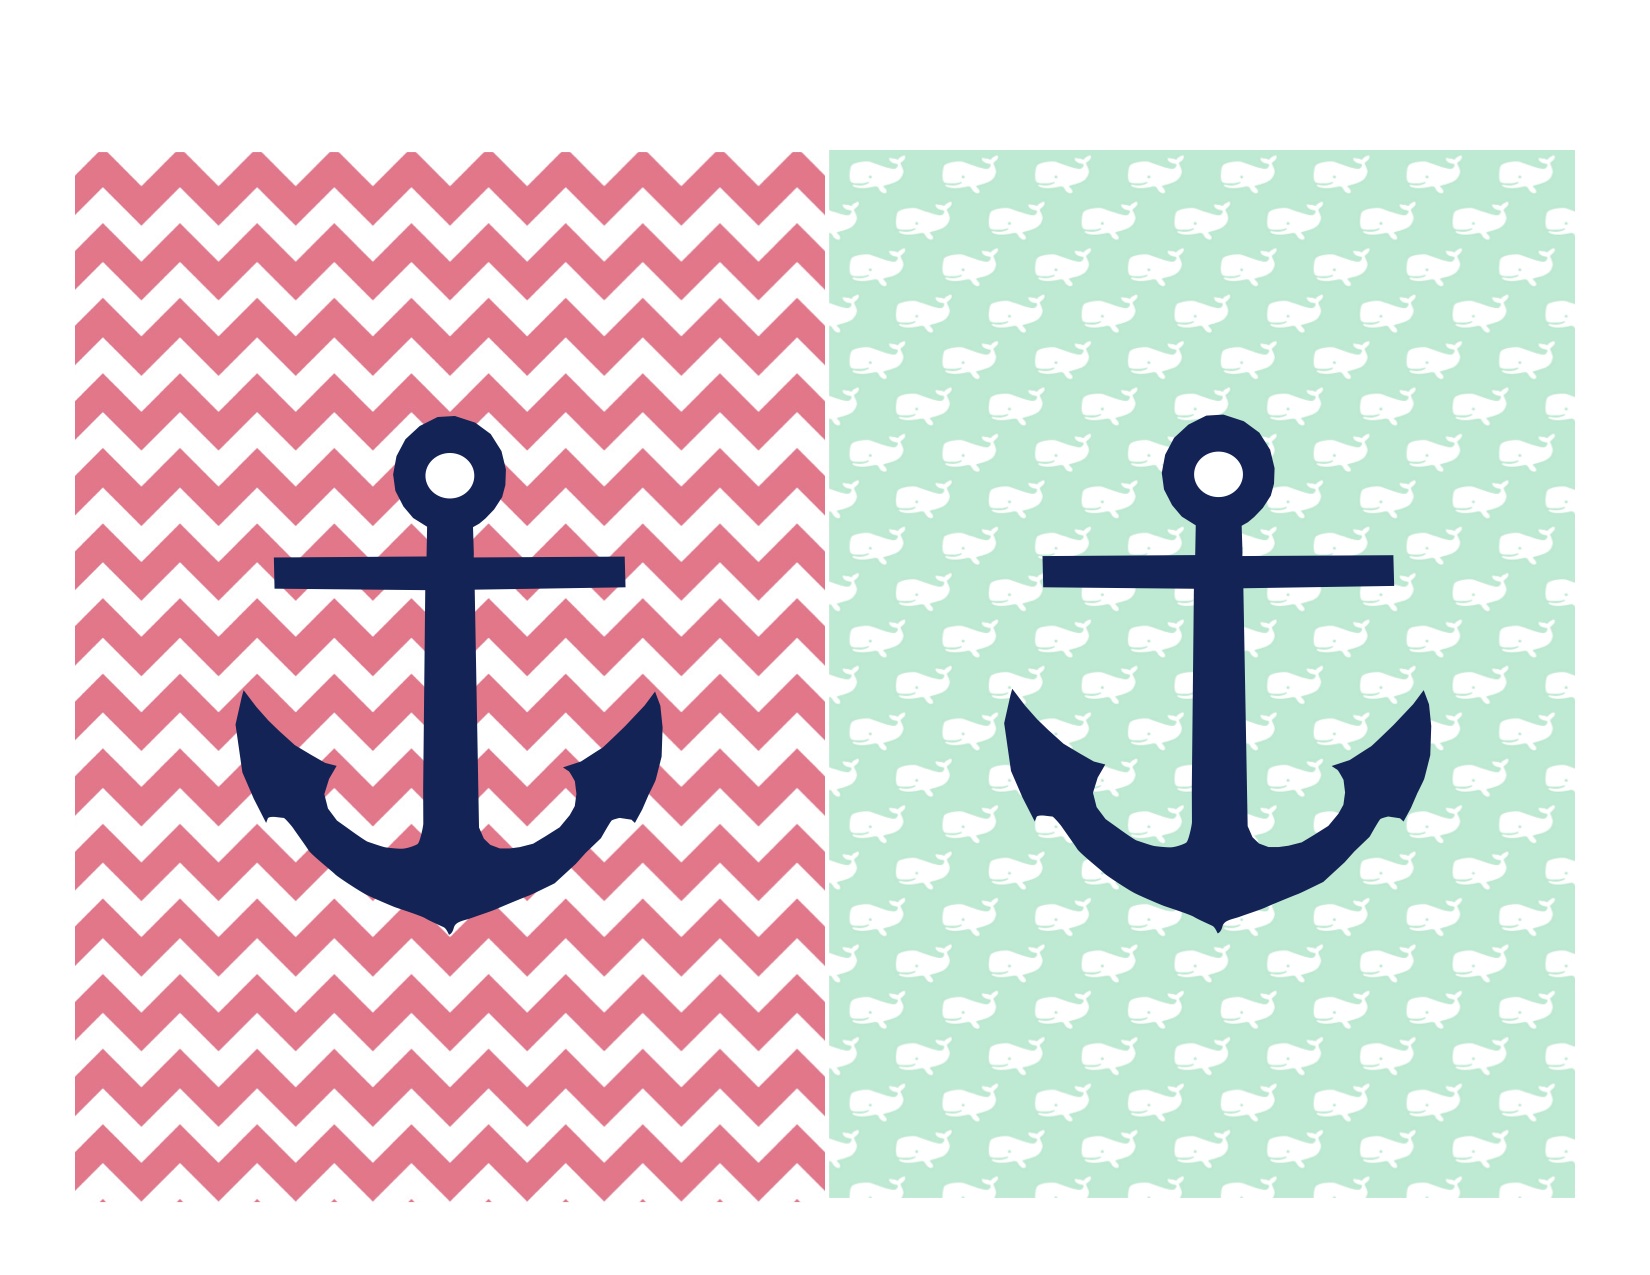 Anchor Wallpaper For Iphone - Cute Chevron Backgrounds With Anchor - HD Wallpaper 